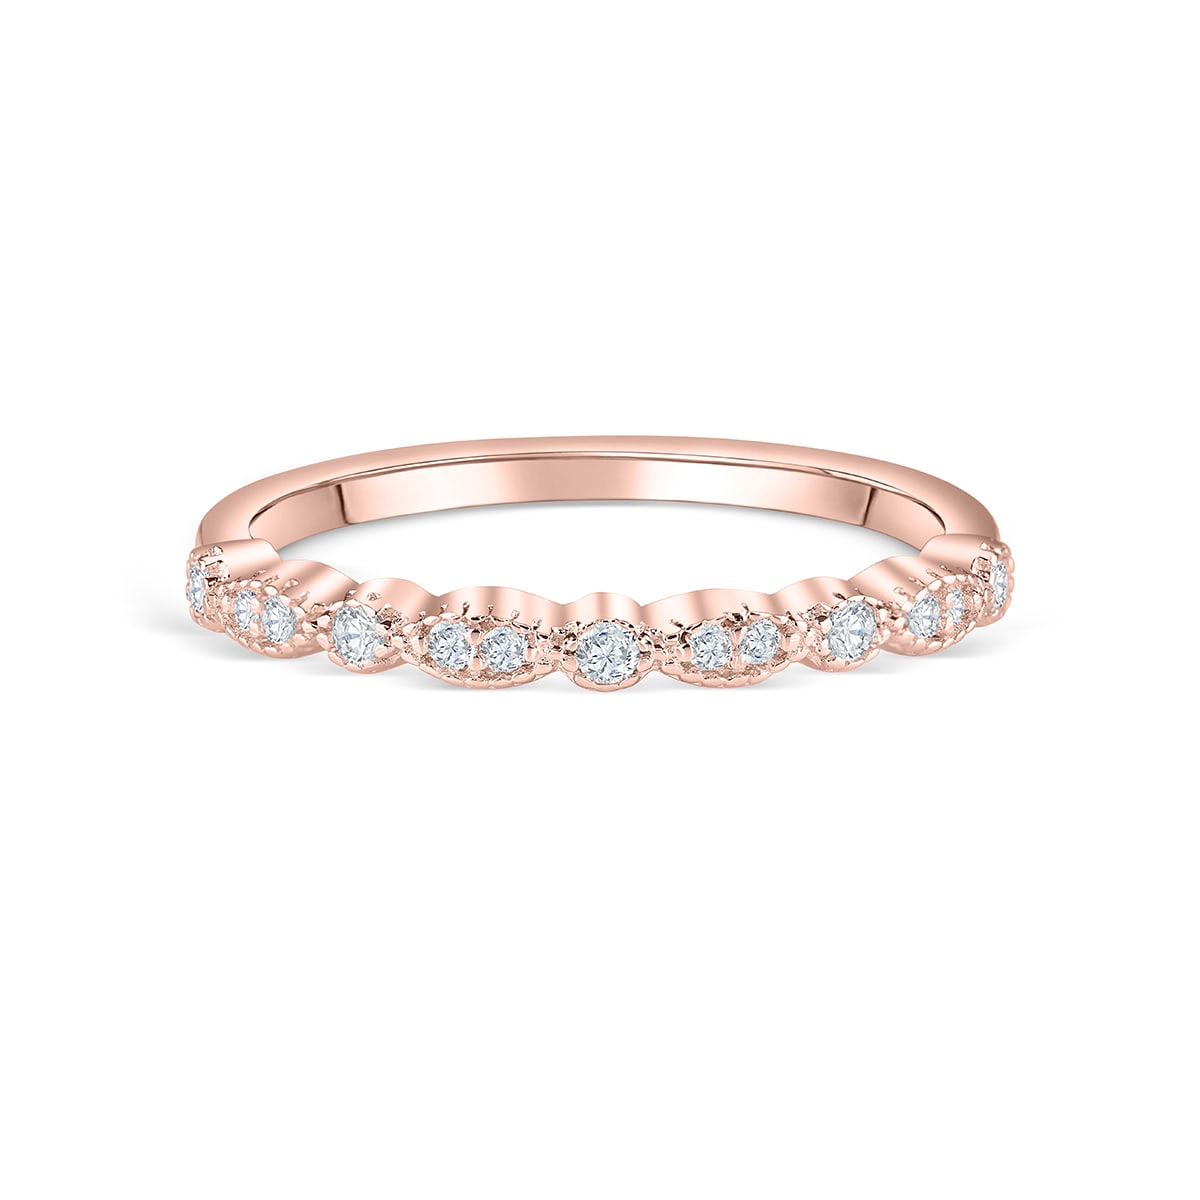 Forever band in rose gold